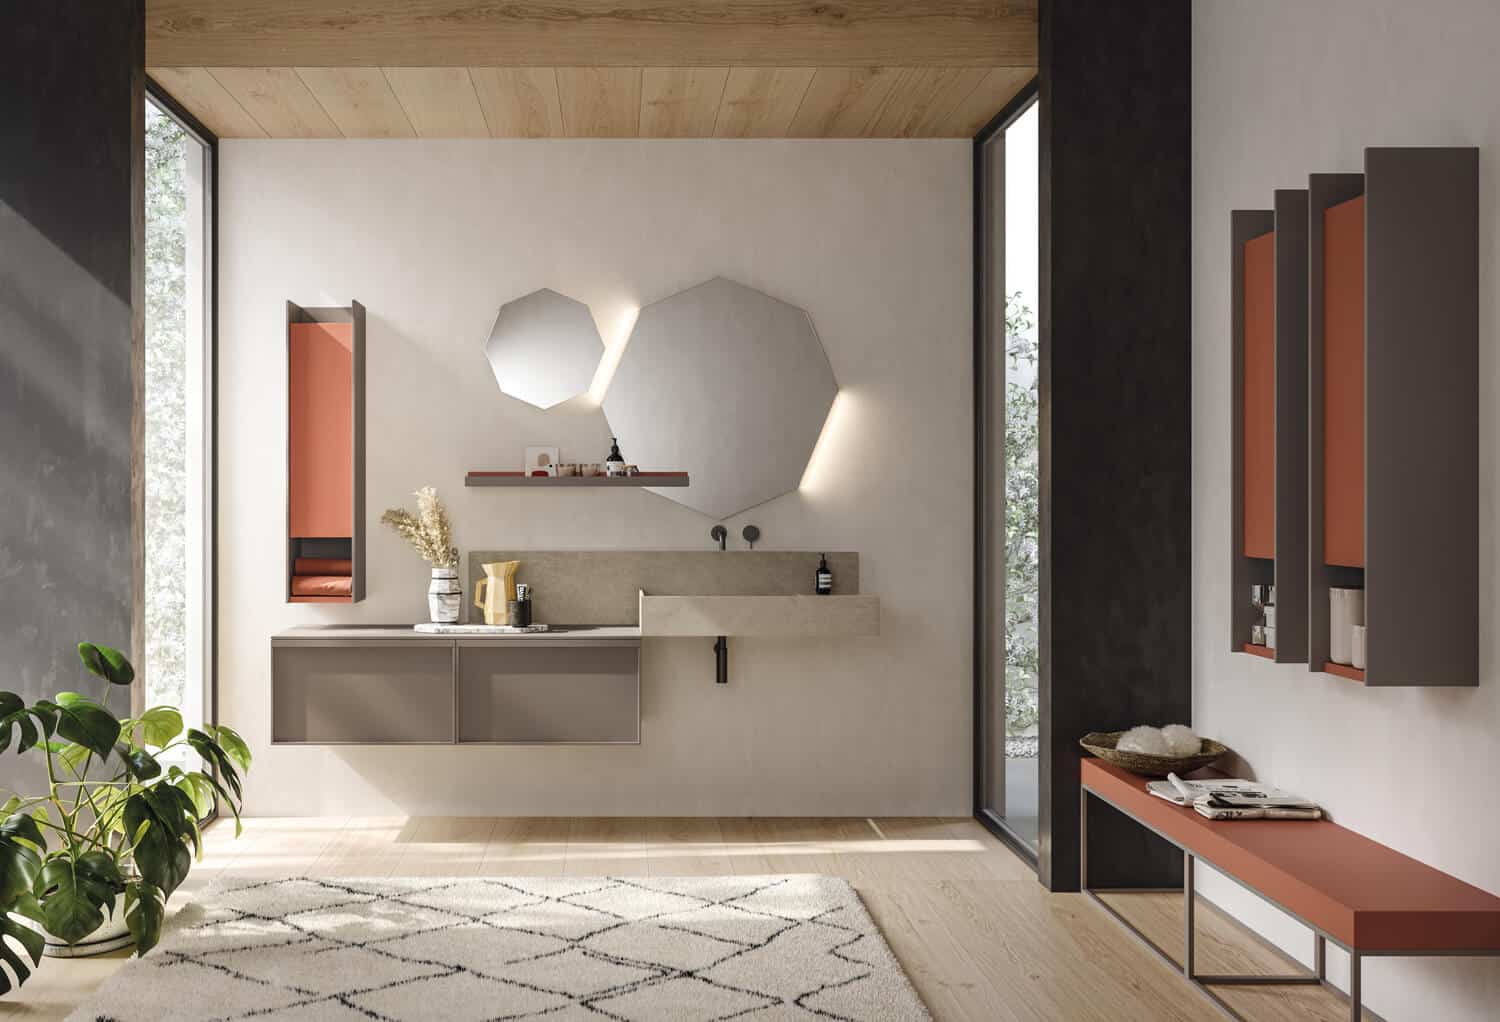 Bathroom with two-toned cabinets in brown and terracotta-orange matte lacquer. Matching bench. Octagonal mirrors.